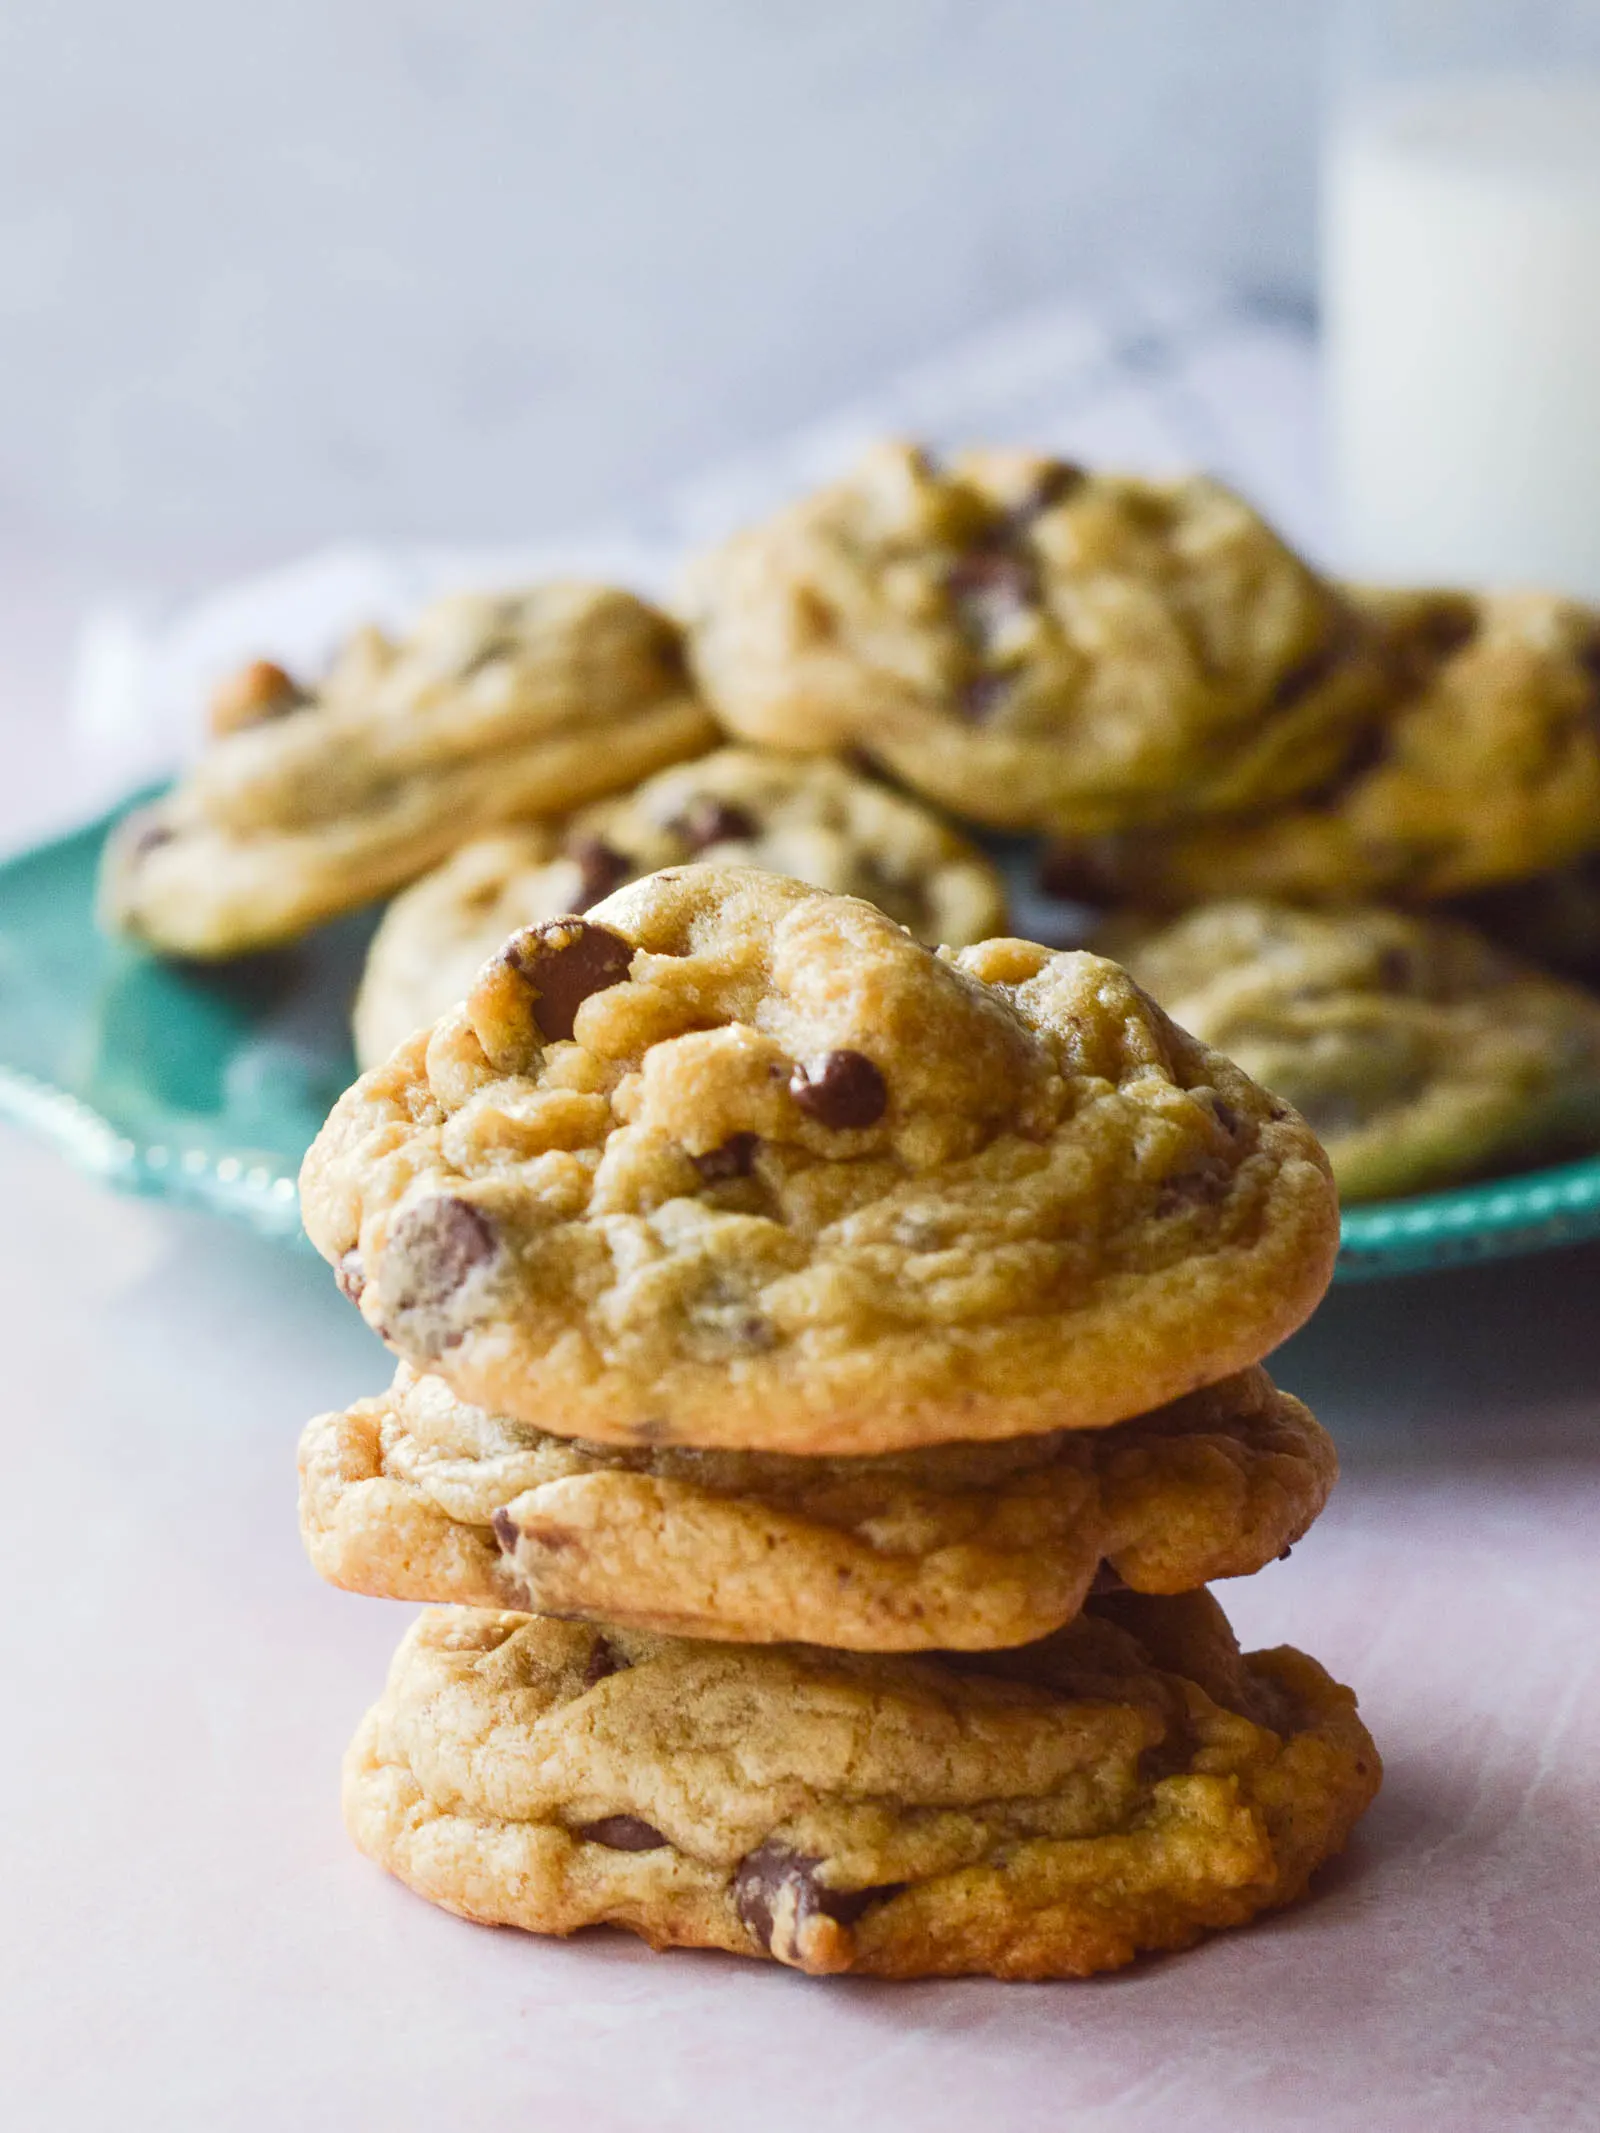 A stack of soft and perfectly wrinkly chocolate chip cookies made with pudding in the mix